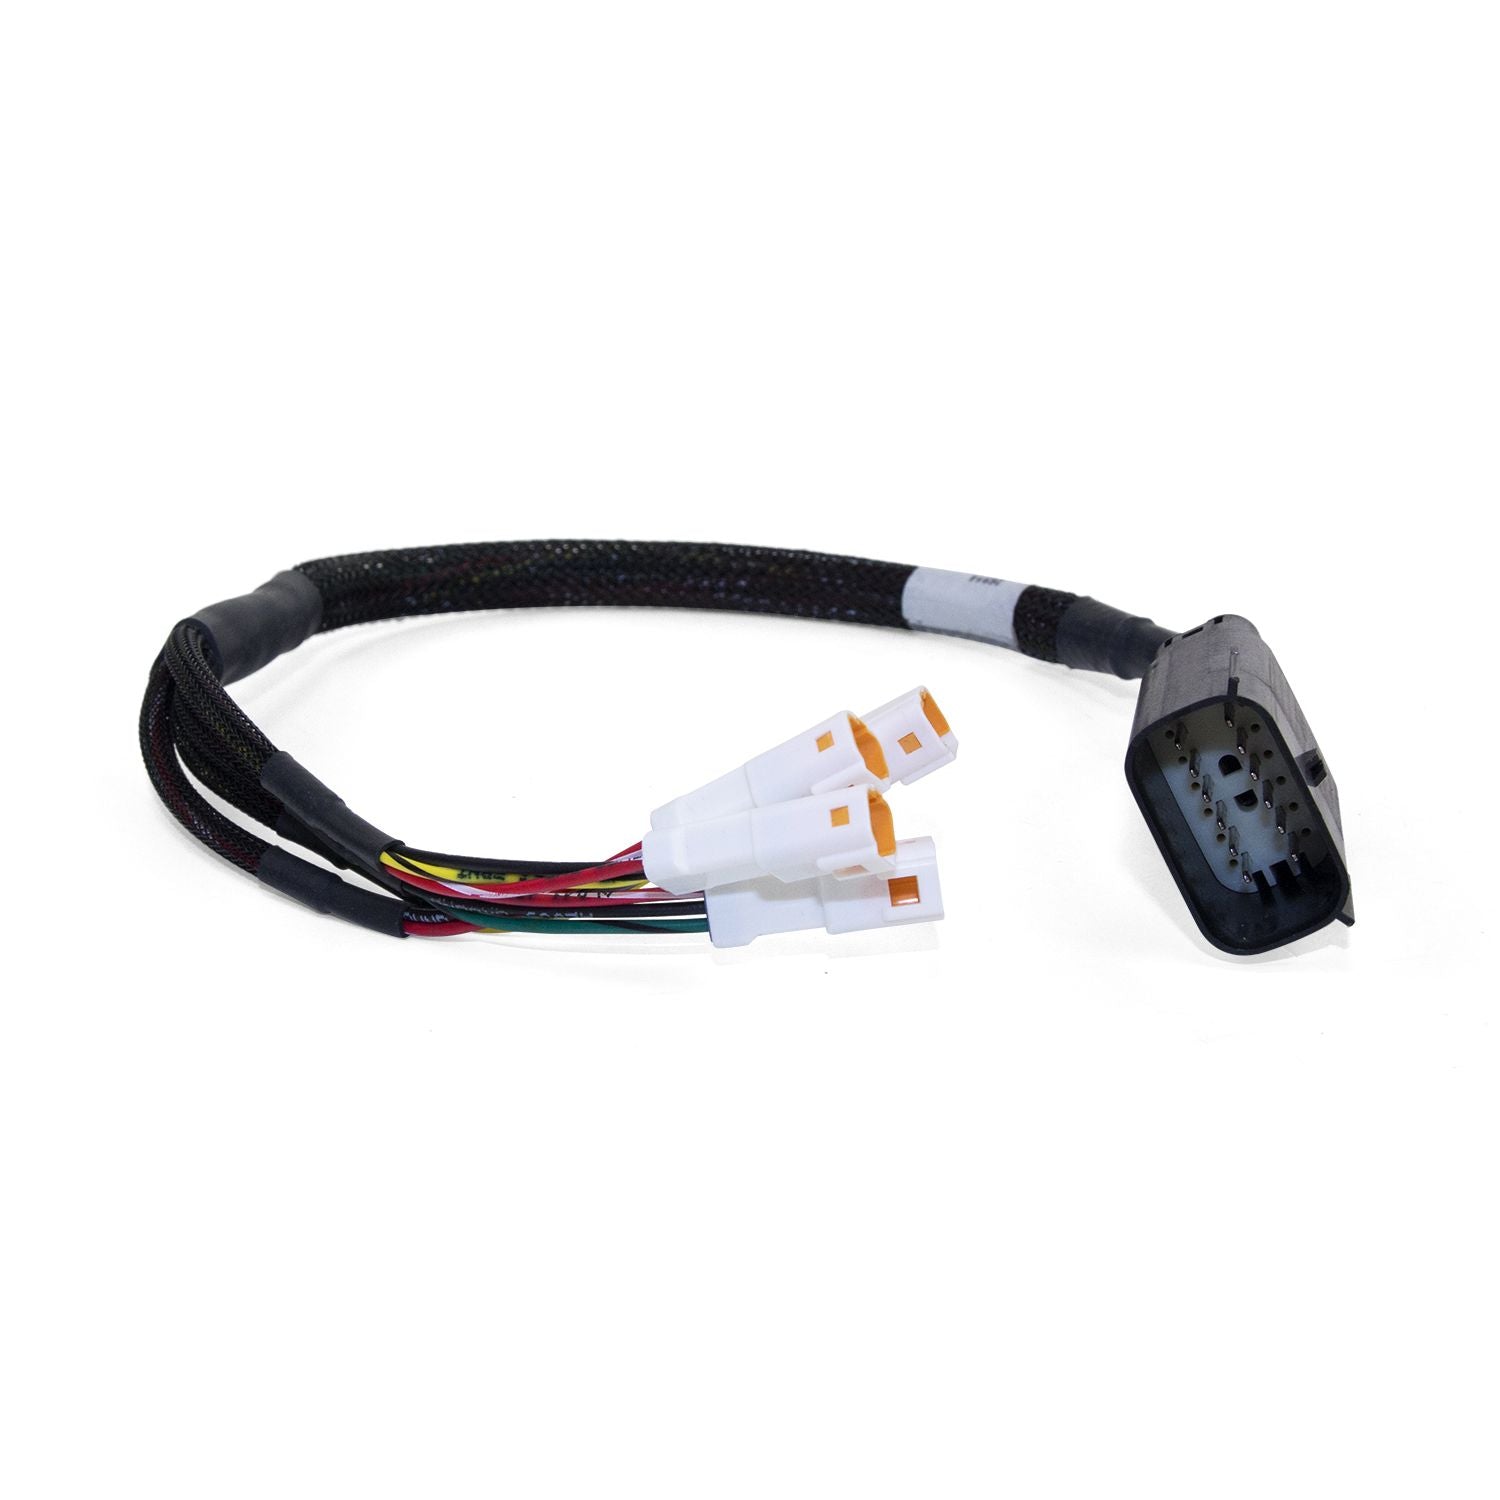 Existing Height Sensor Adapter Harness